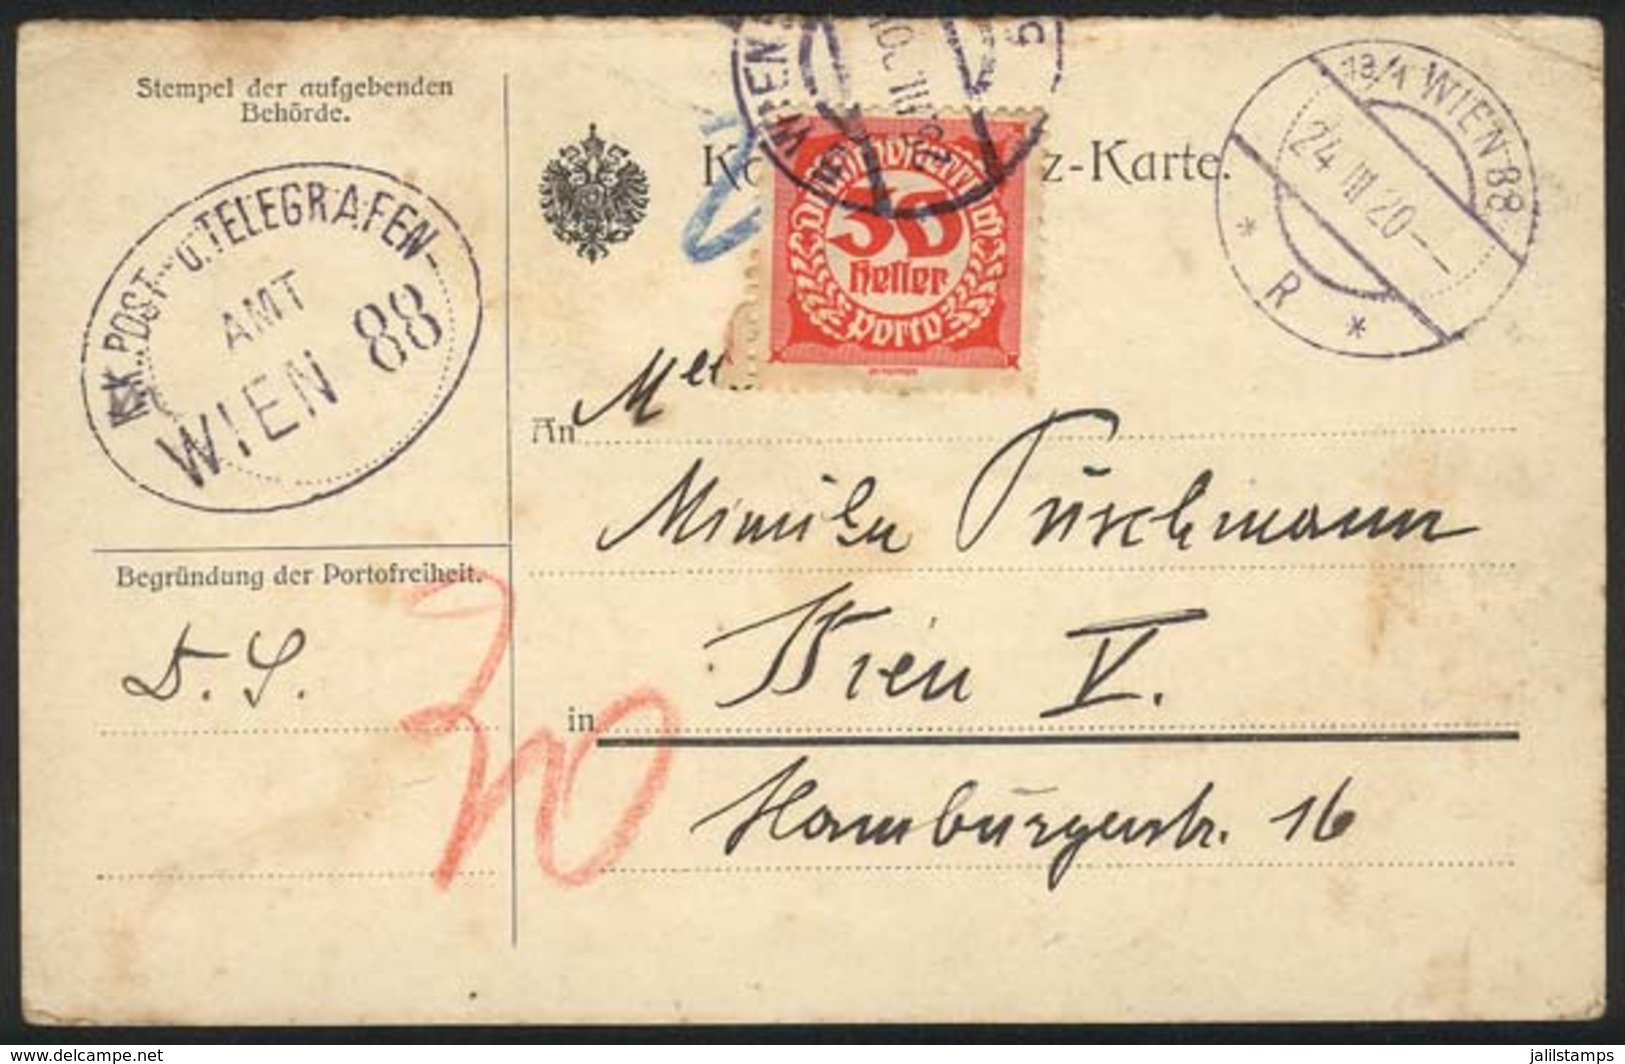 AUSTRIA: Card Used In Wien On 24/MAR/1920, With Postage Due Stamp Of 30h., VF Quality! - Briefe U. Dokumente